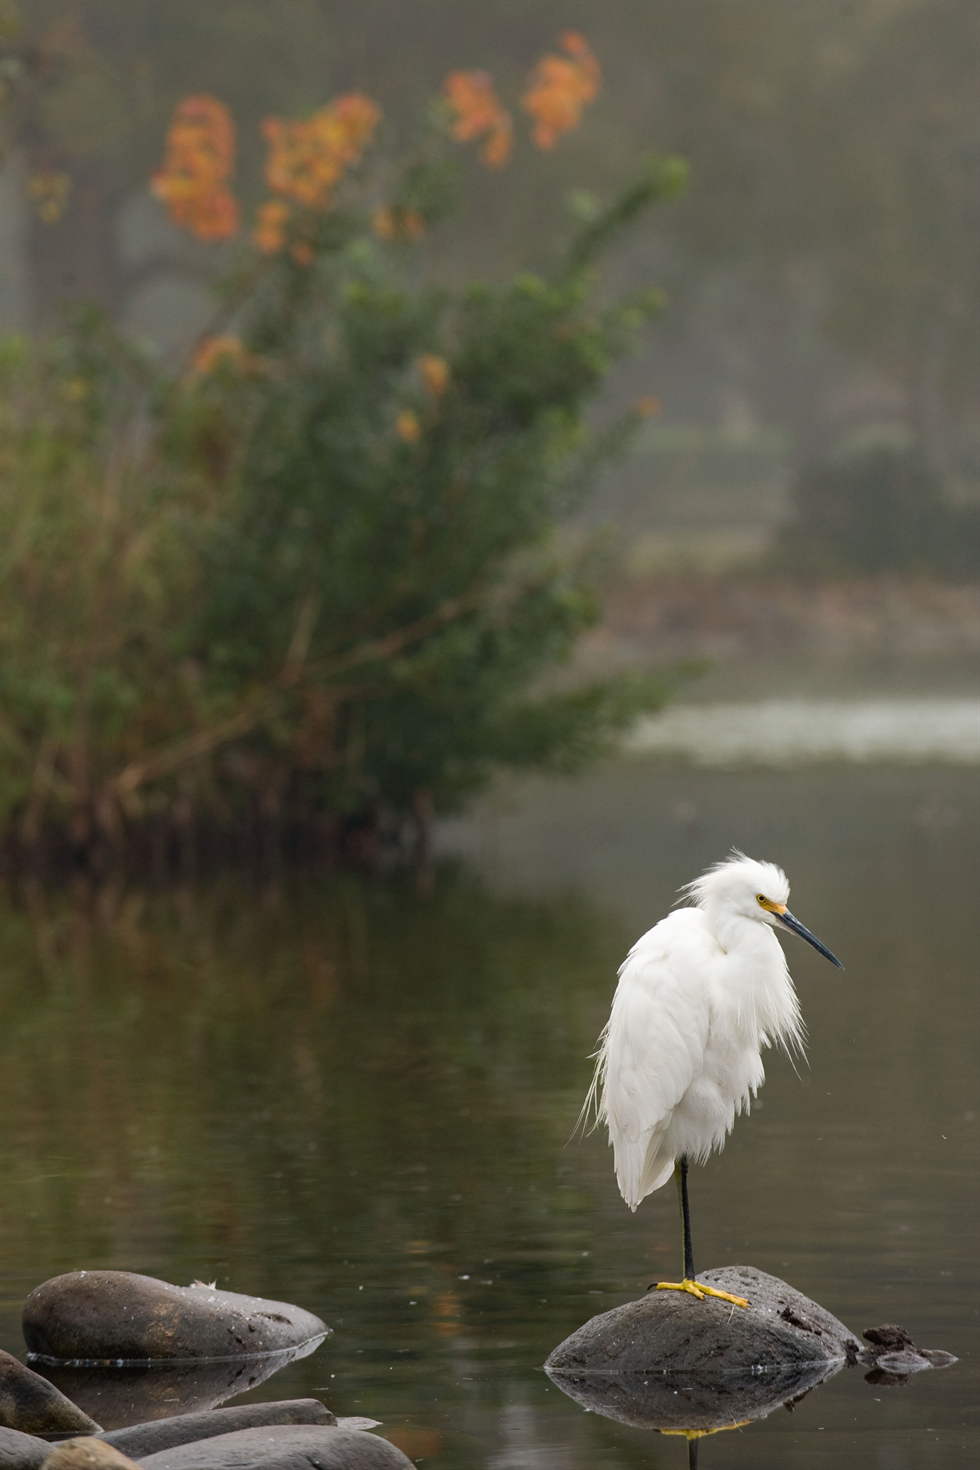 A White Great Egret in Breeding Plumage Stands and Poses at Bombay Hook NWR  in Delaware. This Regal Bird is a Summer Resident of the Area. -  Canada